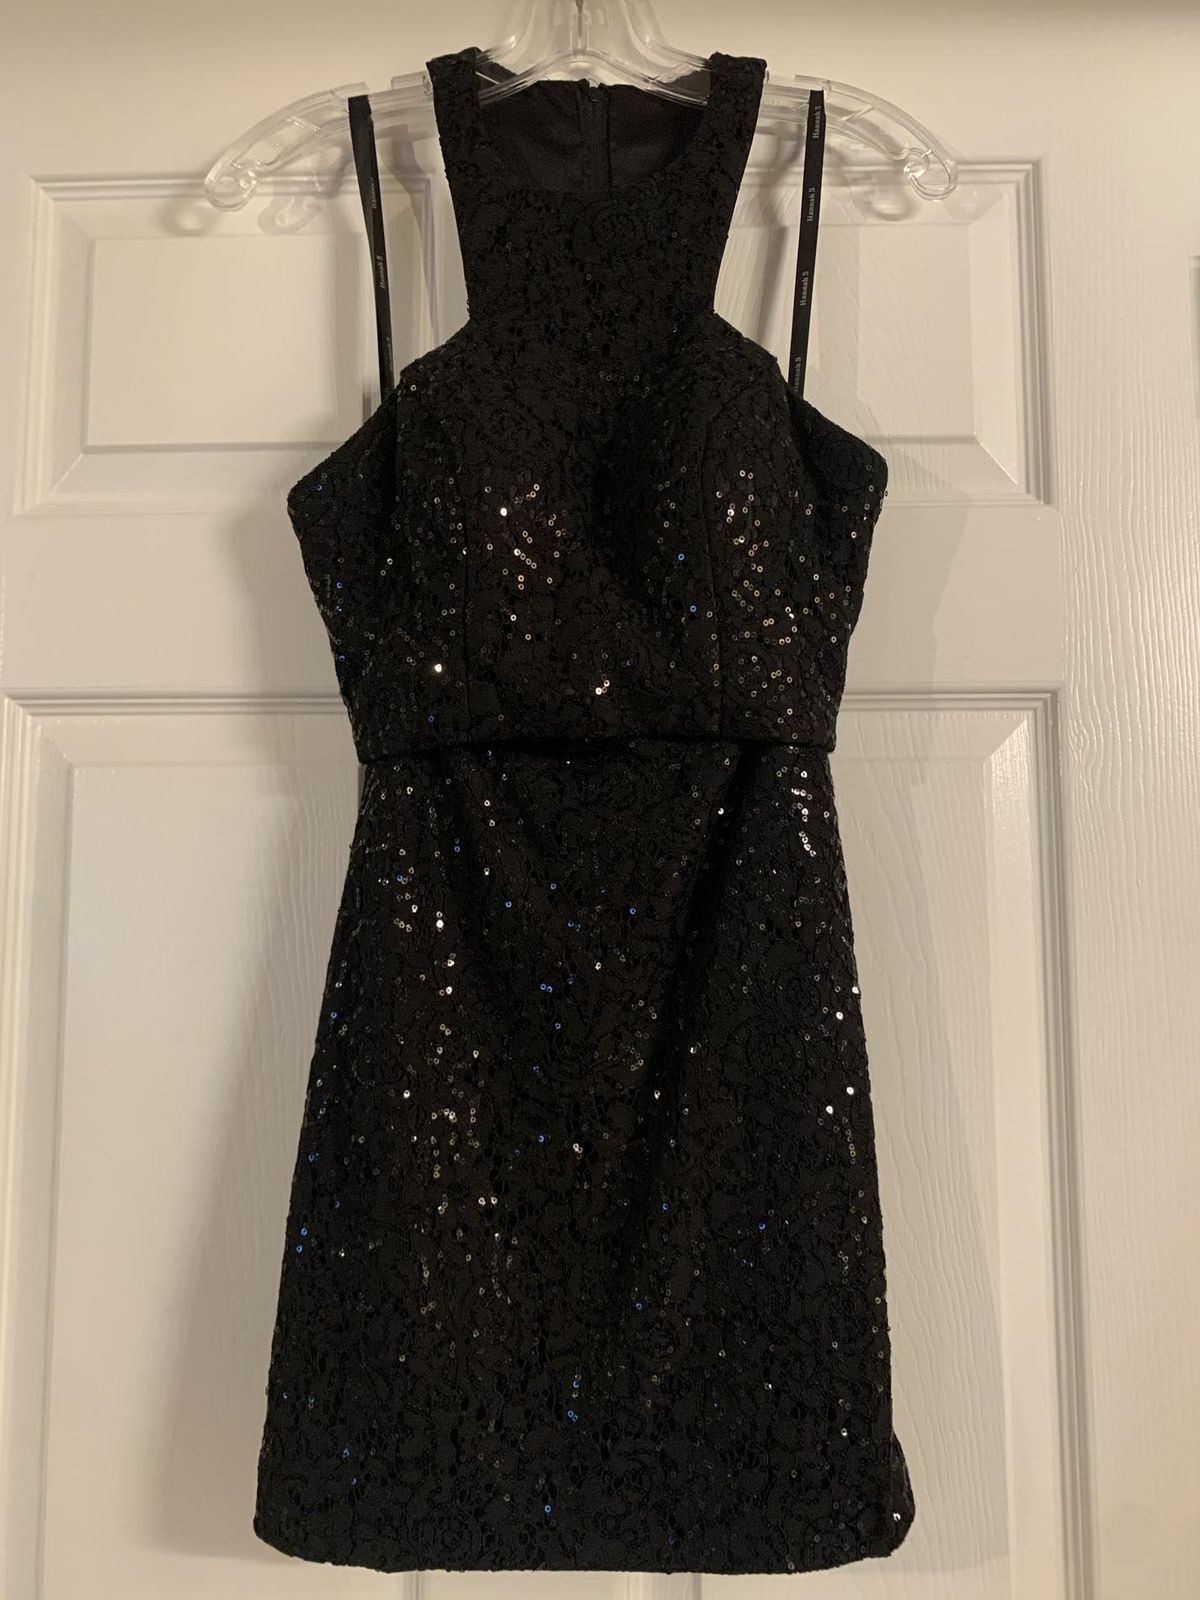 Hannah S Size 2 Black Cocktail Dress on Queenly